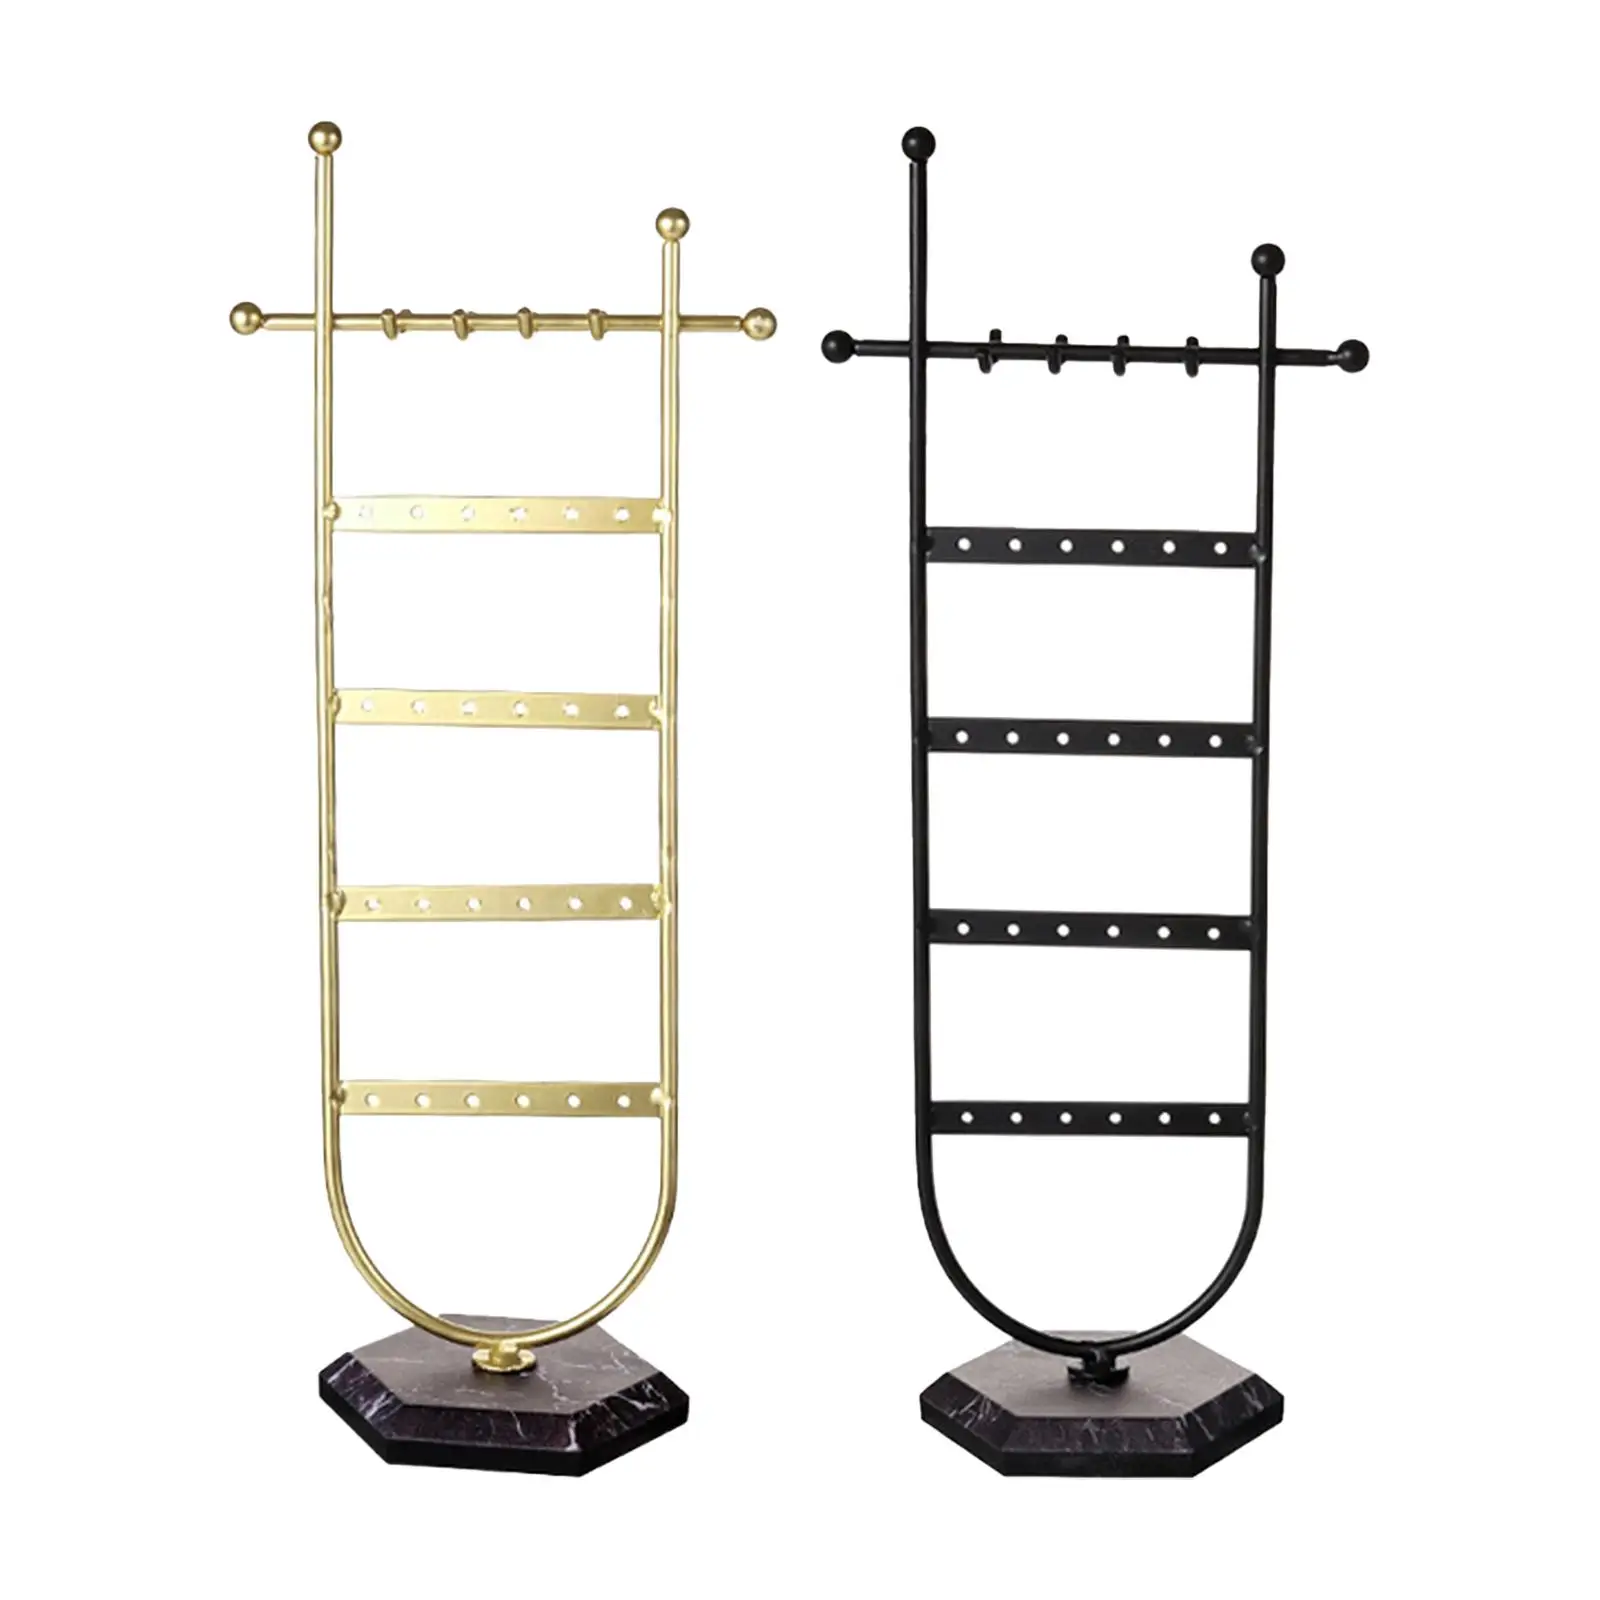 

Earring Organizer with 8 Hooks Stable Base 5 Tiers Earring Display Stand Jewelry Holder for Home Tabletop Showcase Dresser Shops